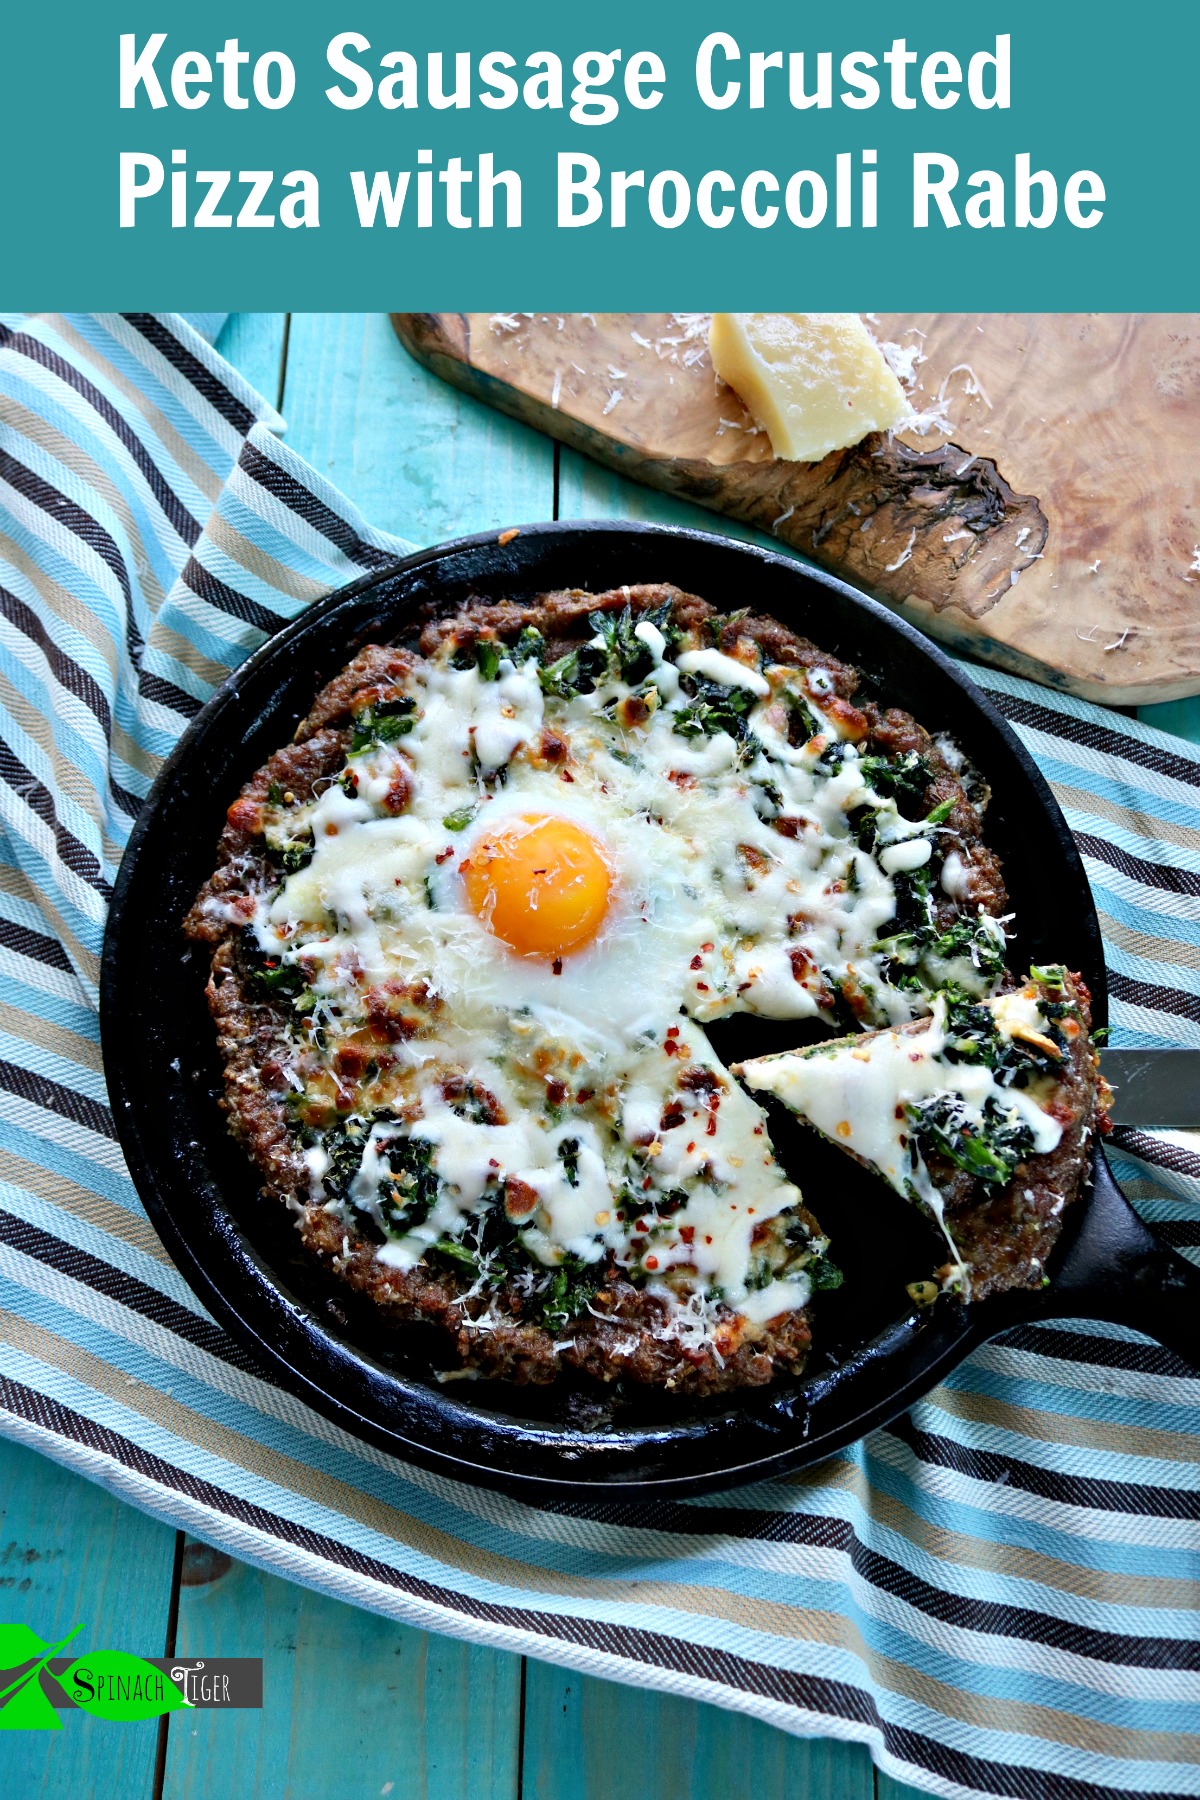 Keto Sausage Crusted Pizza with Broccoli Rabe and Fried Egg